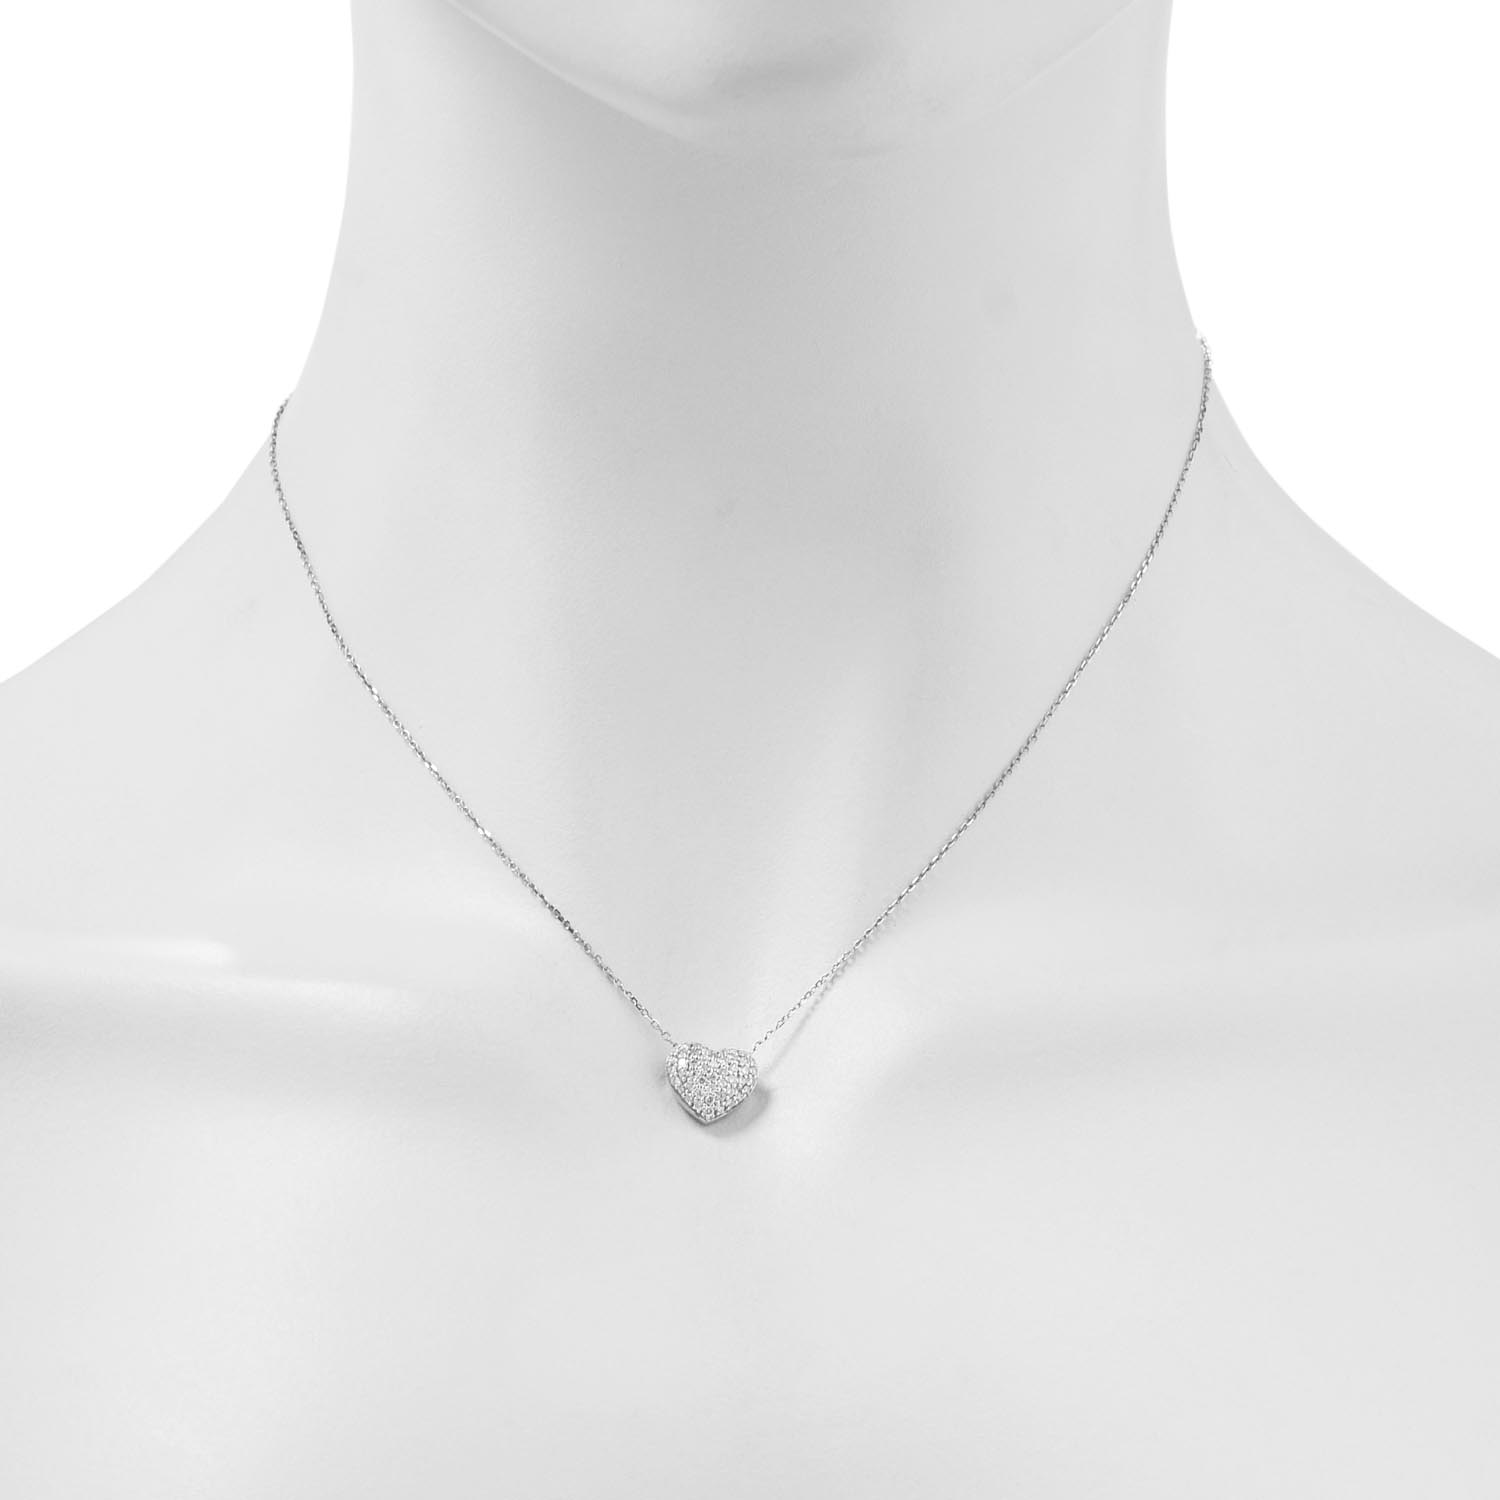 Diamond Puffed Heart Necklace 14kt White Gold (1/3ct tw)